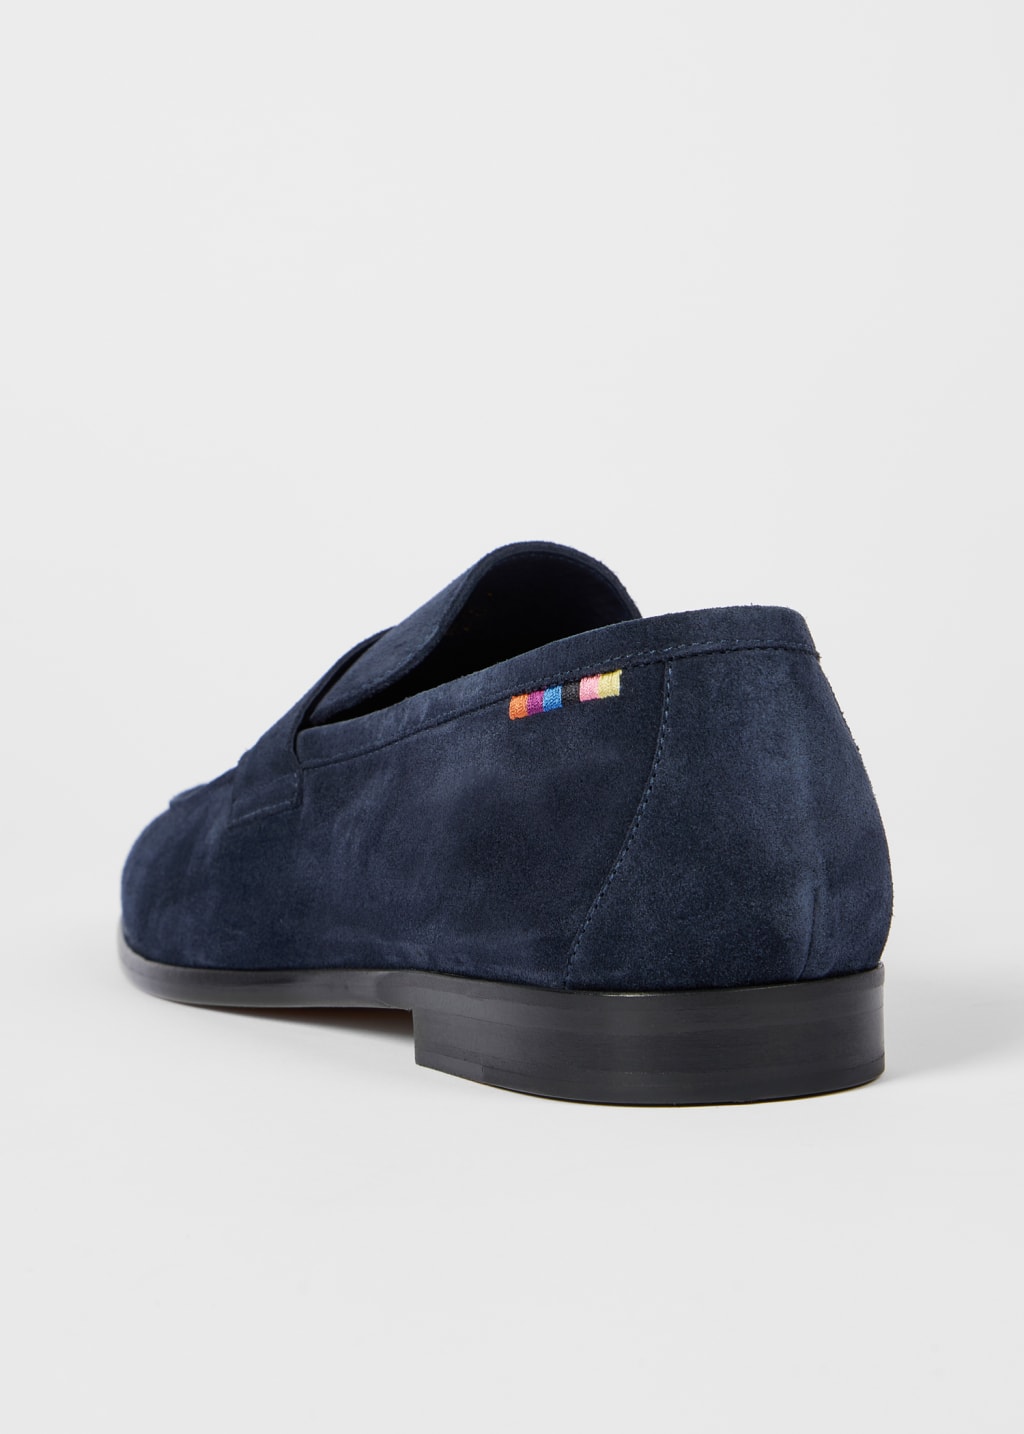 Side View - Navy Suede 'Figaro' Loafers Paul Smith